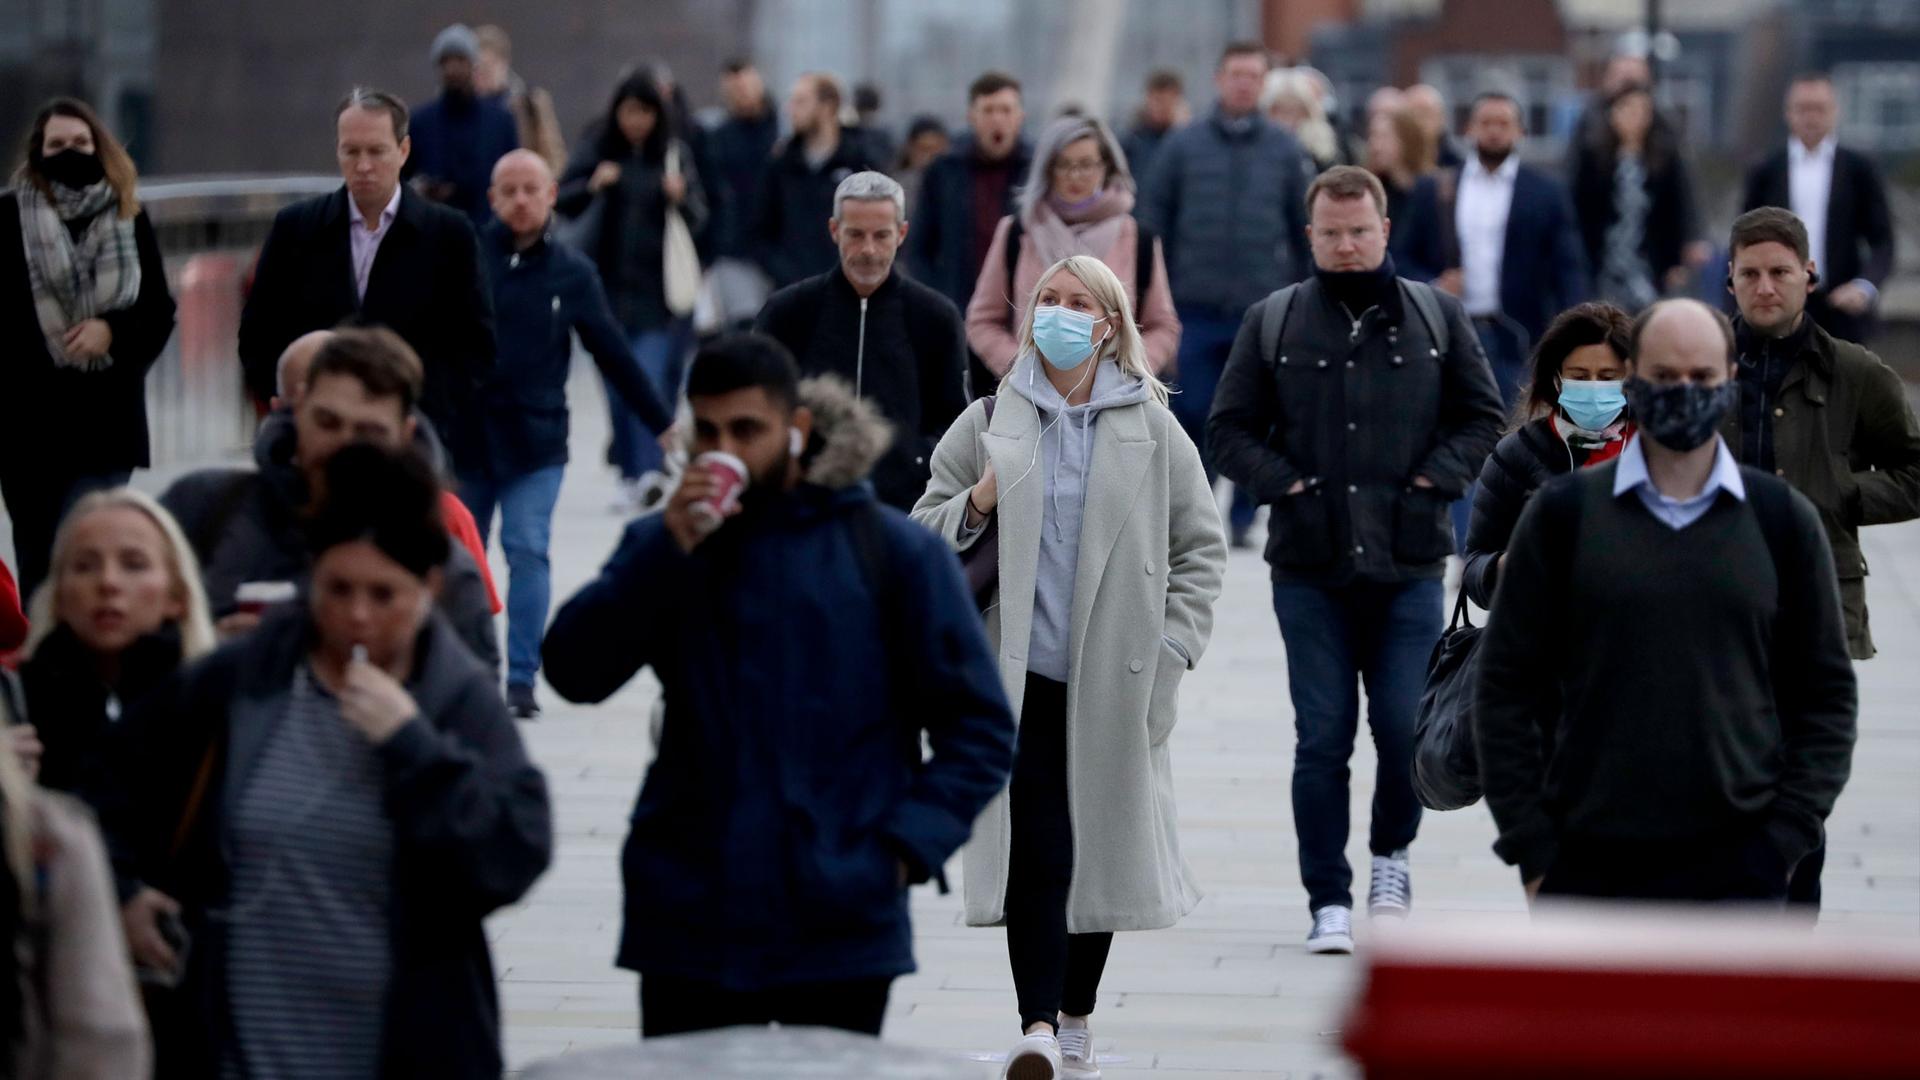 A crowd of people are shown walking across the London Bridge, many wearing face masks.